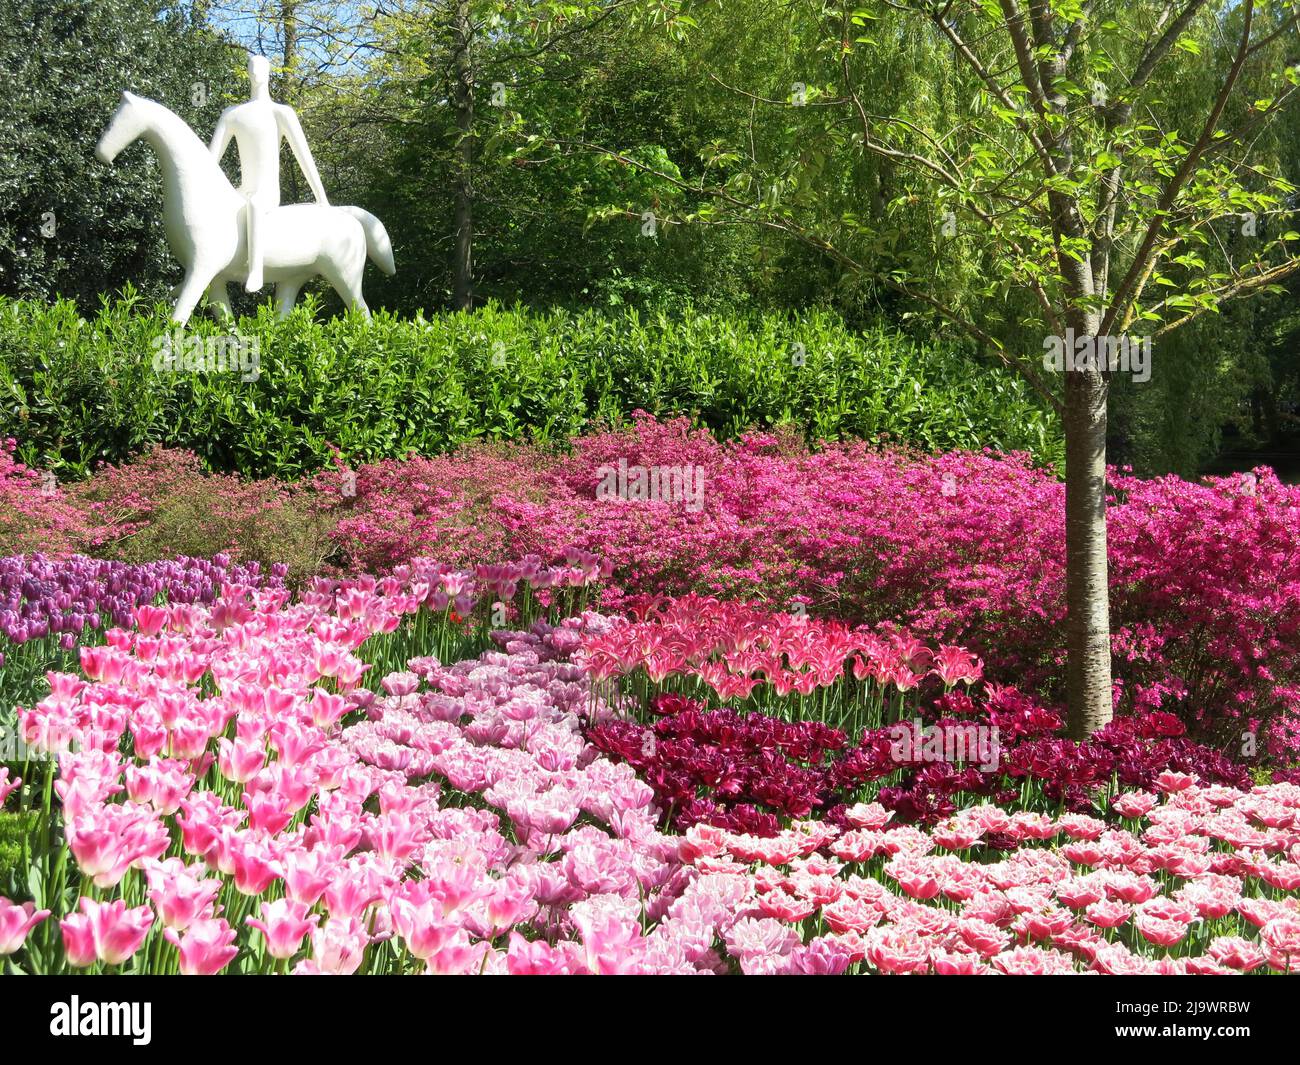 White sculpture of a man on a horse, with a swathe of pink & purple tulips; one of the iconic scenes at the spring bulb festival Keukenhof 2022. Stock Photo